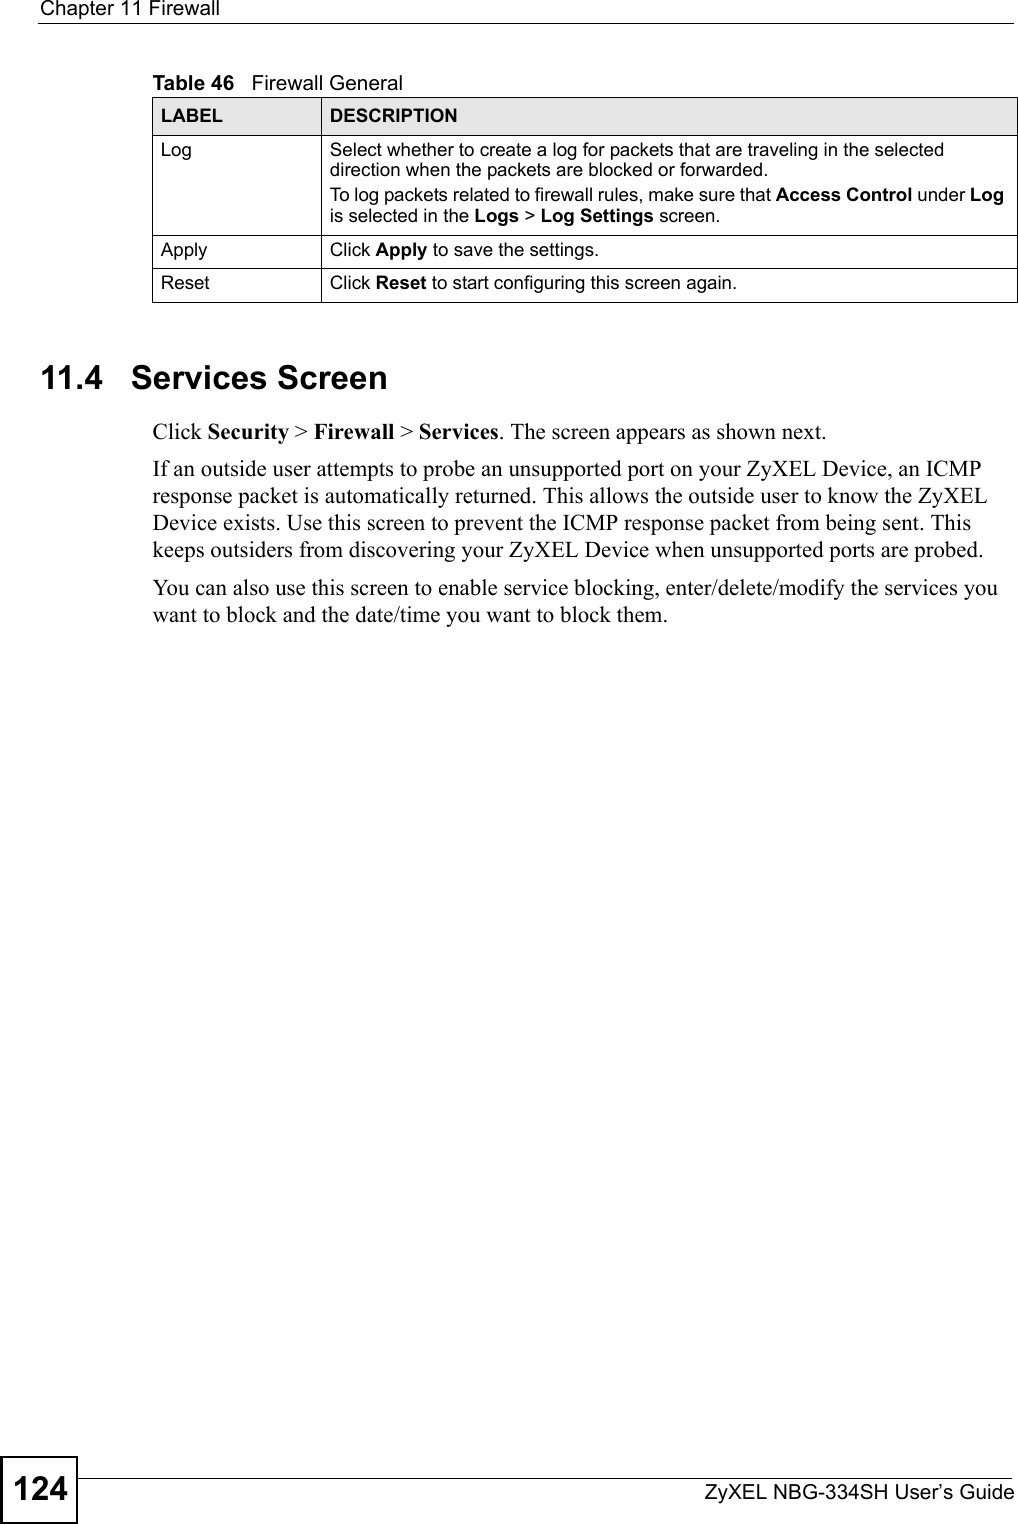 Chapter 11 FirewallZyXEL NBG-334SH User’s Guide12411.4   Services ScreenClick Security &gt; Firewall &gt; Services. The screen appears as shown next. If an outside user attempts to probe an unsupported port on your ZyXEL Device, an ICMP response packet is automatically returned. This allows the outside user to know the ZyXEL Device exists. Use this screen to prevent the ICMP response packet from being sent. This keeps outsiders from discovering your ZyXEL Device when unsupported ports are probed.You can also use this screen to enable service blocking, enter/delete/modify the services you want to block and the date/time you want to block them.Log Select whether to create a log for packets that are traveling in the selected direction when the packets are blocked or forwarded.To log packets related to firewall rules, make sure that Access Control under Log is selected in the Logs &gt; Log Settings screen. Apply Click Apply to save the settings. Reset Click Reset to start configuring this screen again. Table 46   Firewall GeneralLABEL DESCRIPTION